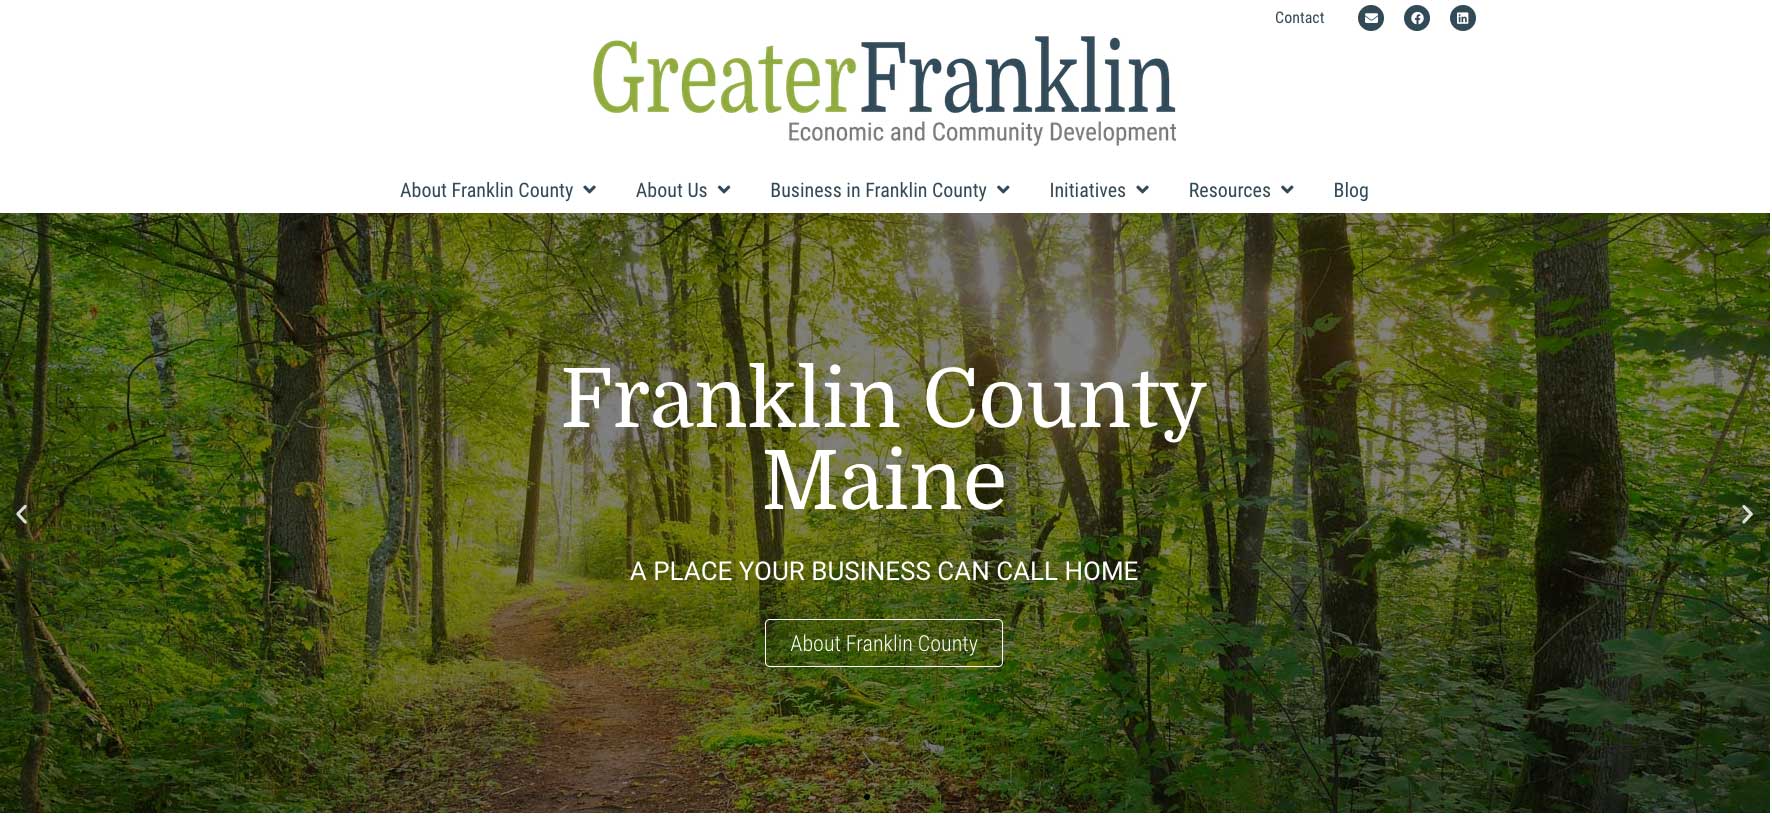 Greater Franklin Homepage